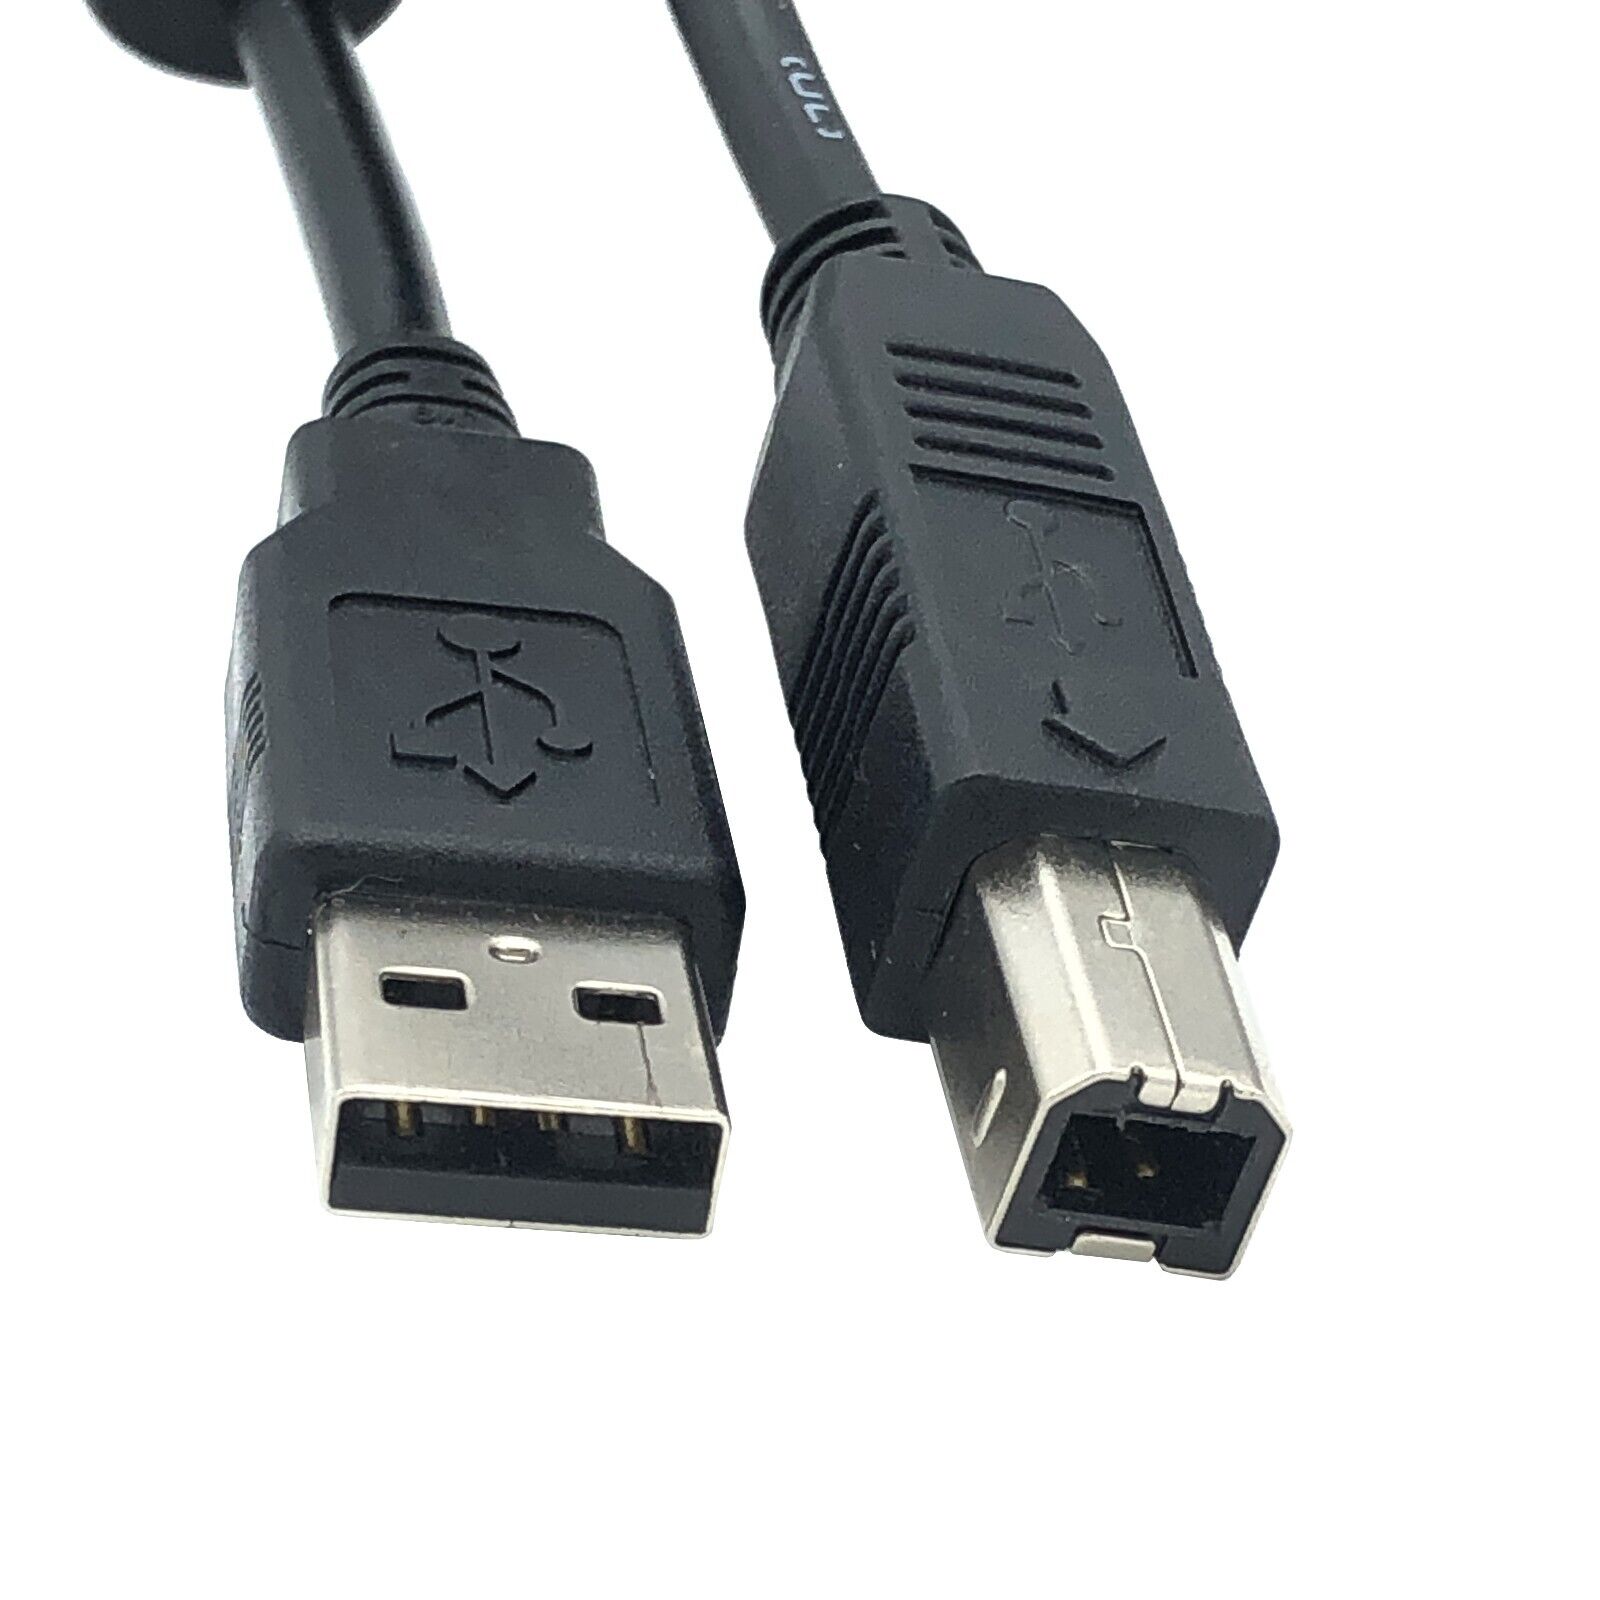 Branded USB 2.0 Cable for Audio Interface Midi Keyboard USB Microphone Cord